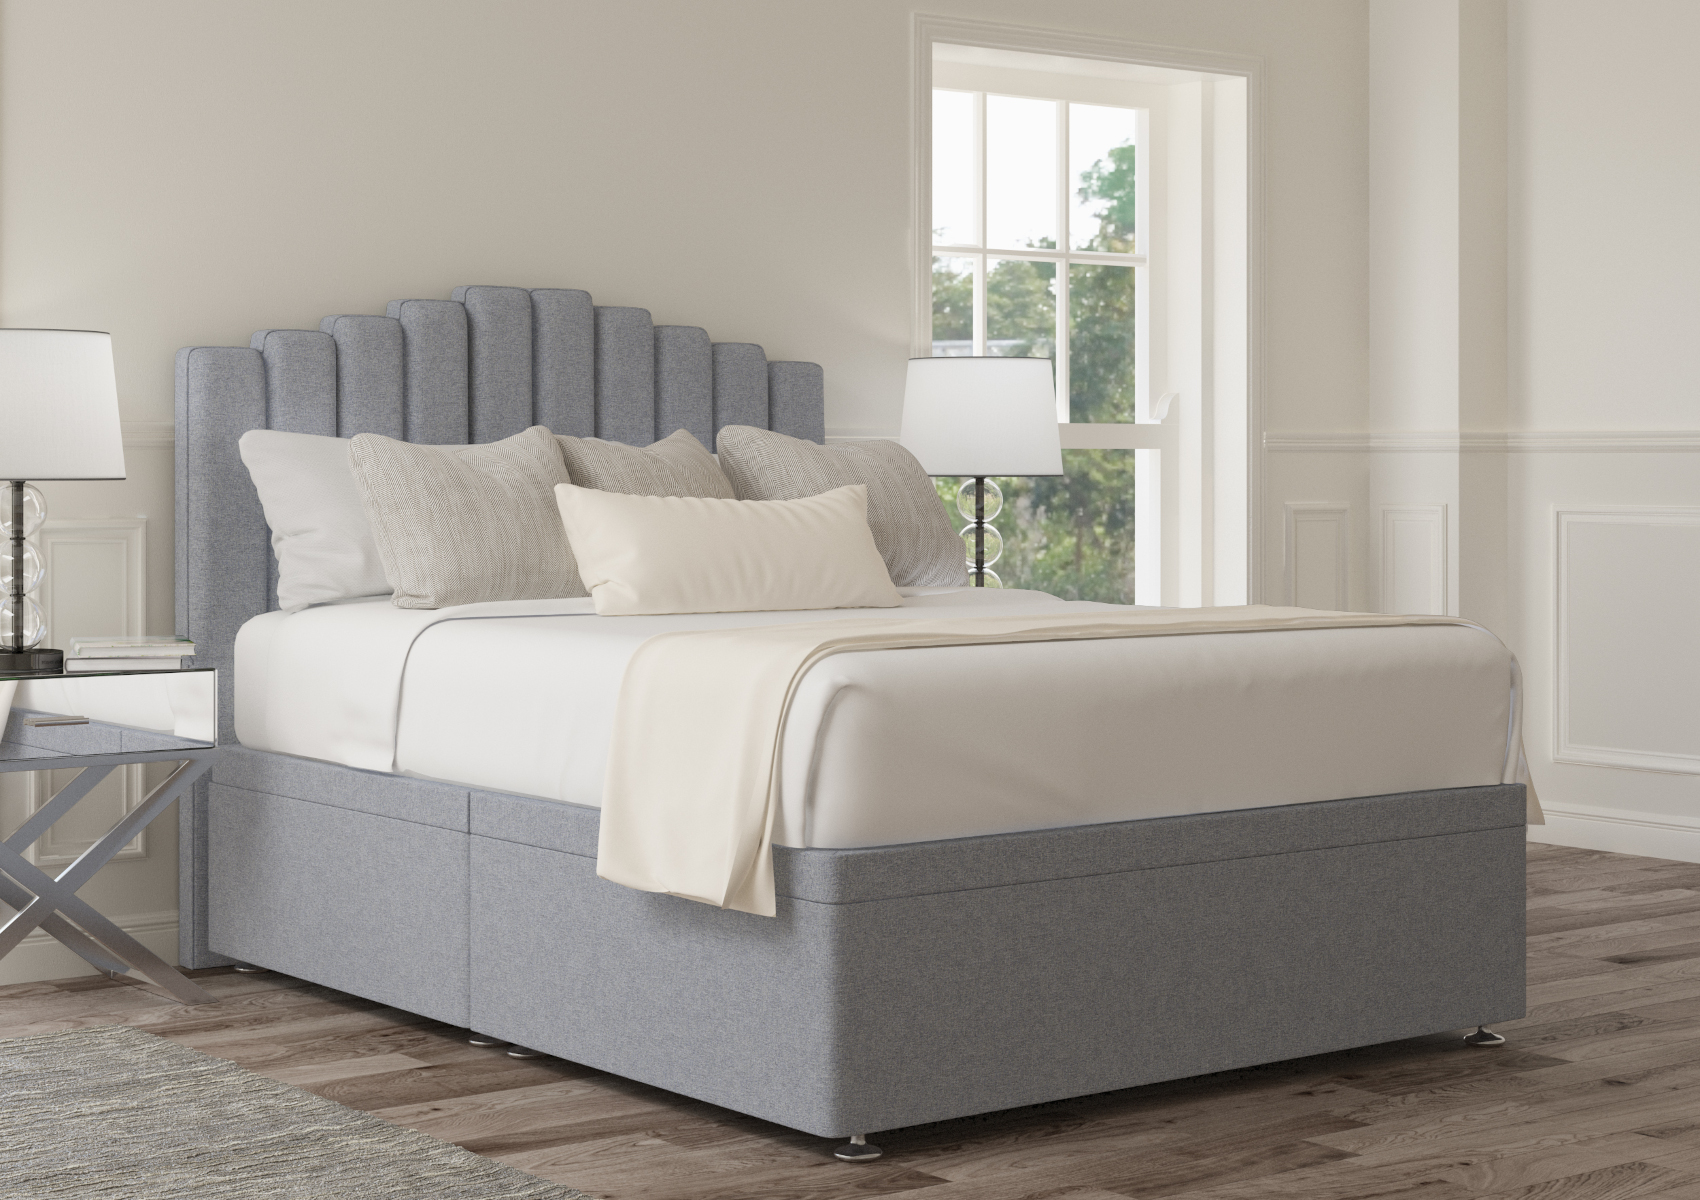 View Quinn Trebla Flax Upholstered King Size Ottoman Bed Time4Sleep information